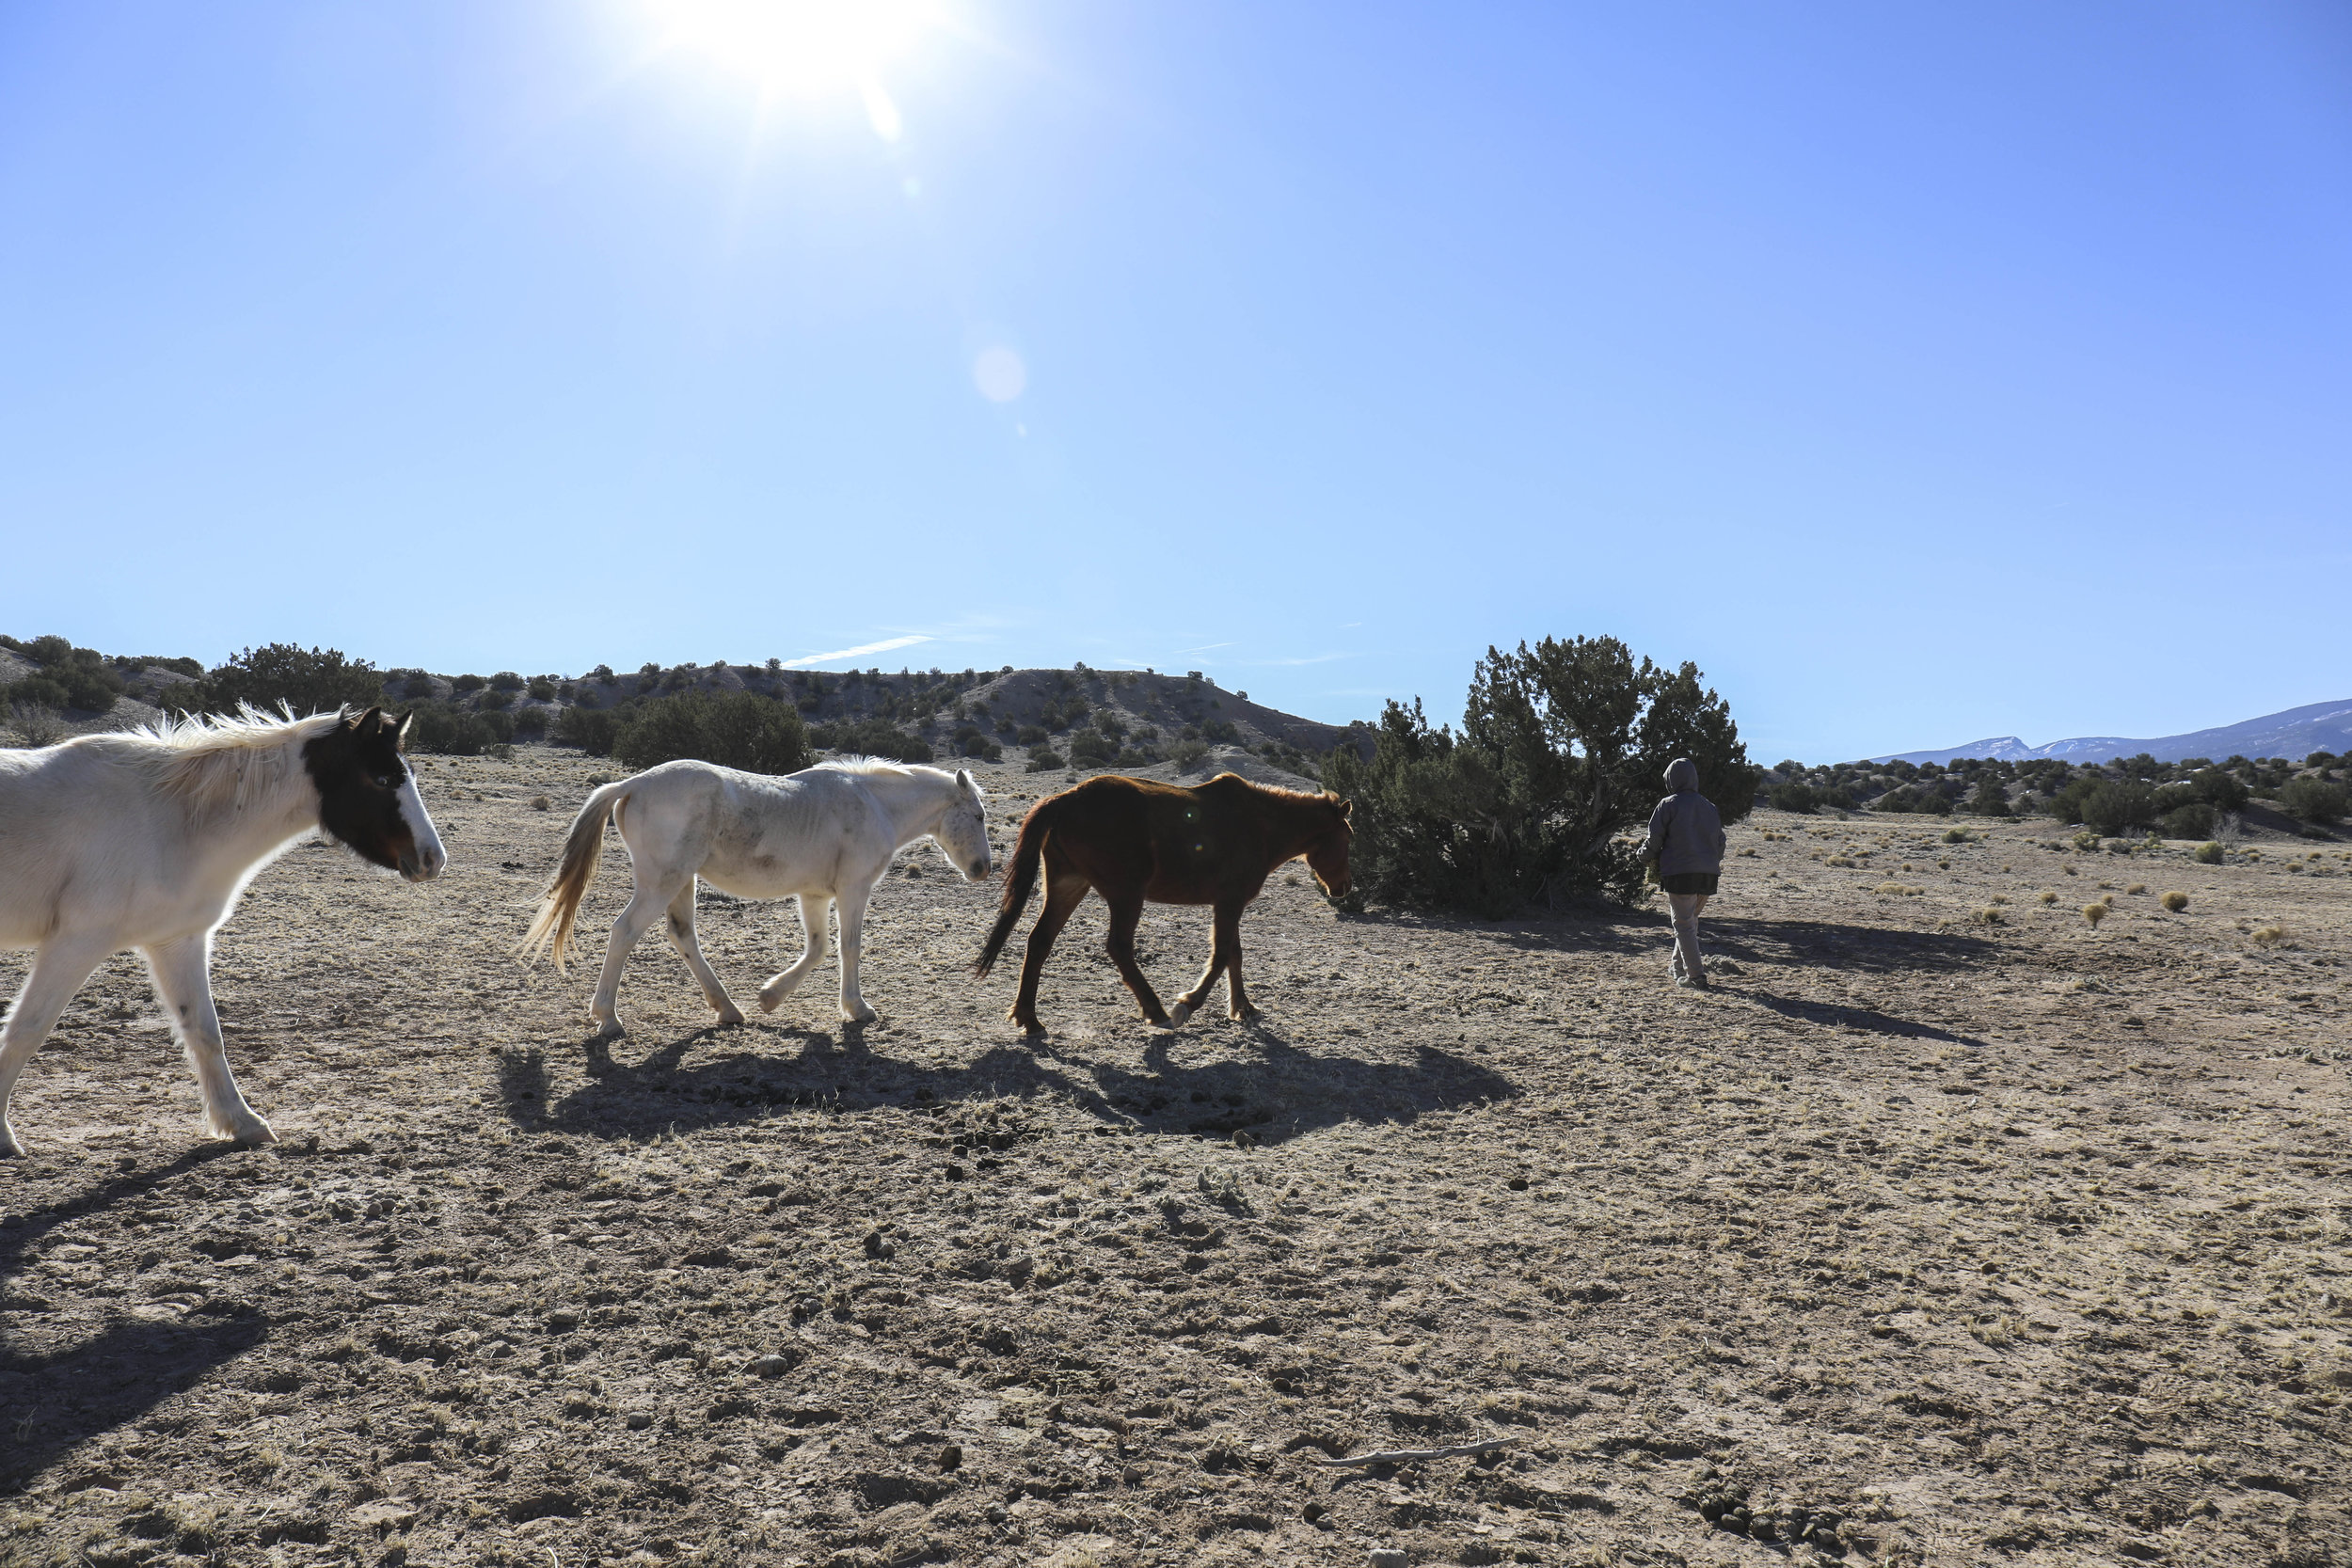  Adelina Sosa, seen carrying a bale of hay to the horses on the San Felipe preserve in late February, has been helping with the free-roaming horses since she moved to Placitas 19 years ago. The 69-year-old has tended to their wounds, nursed starving 